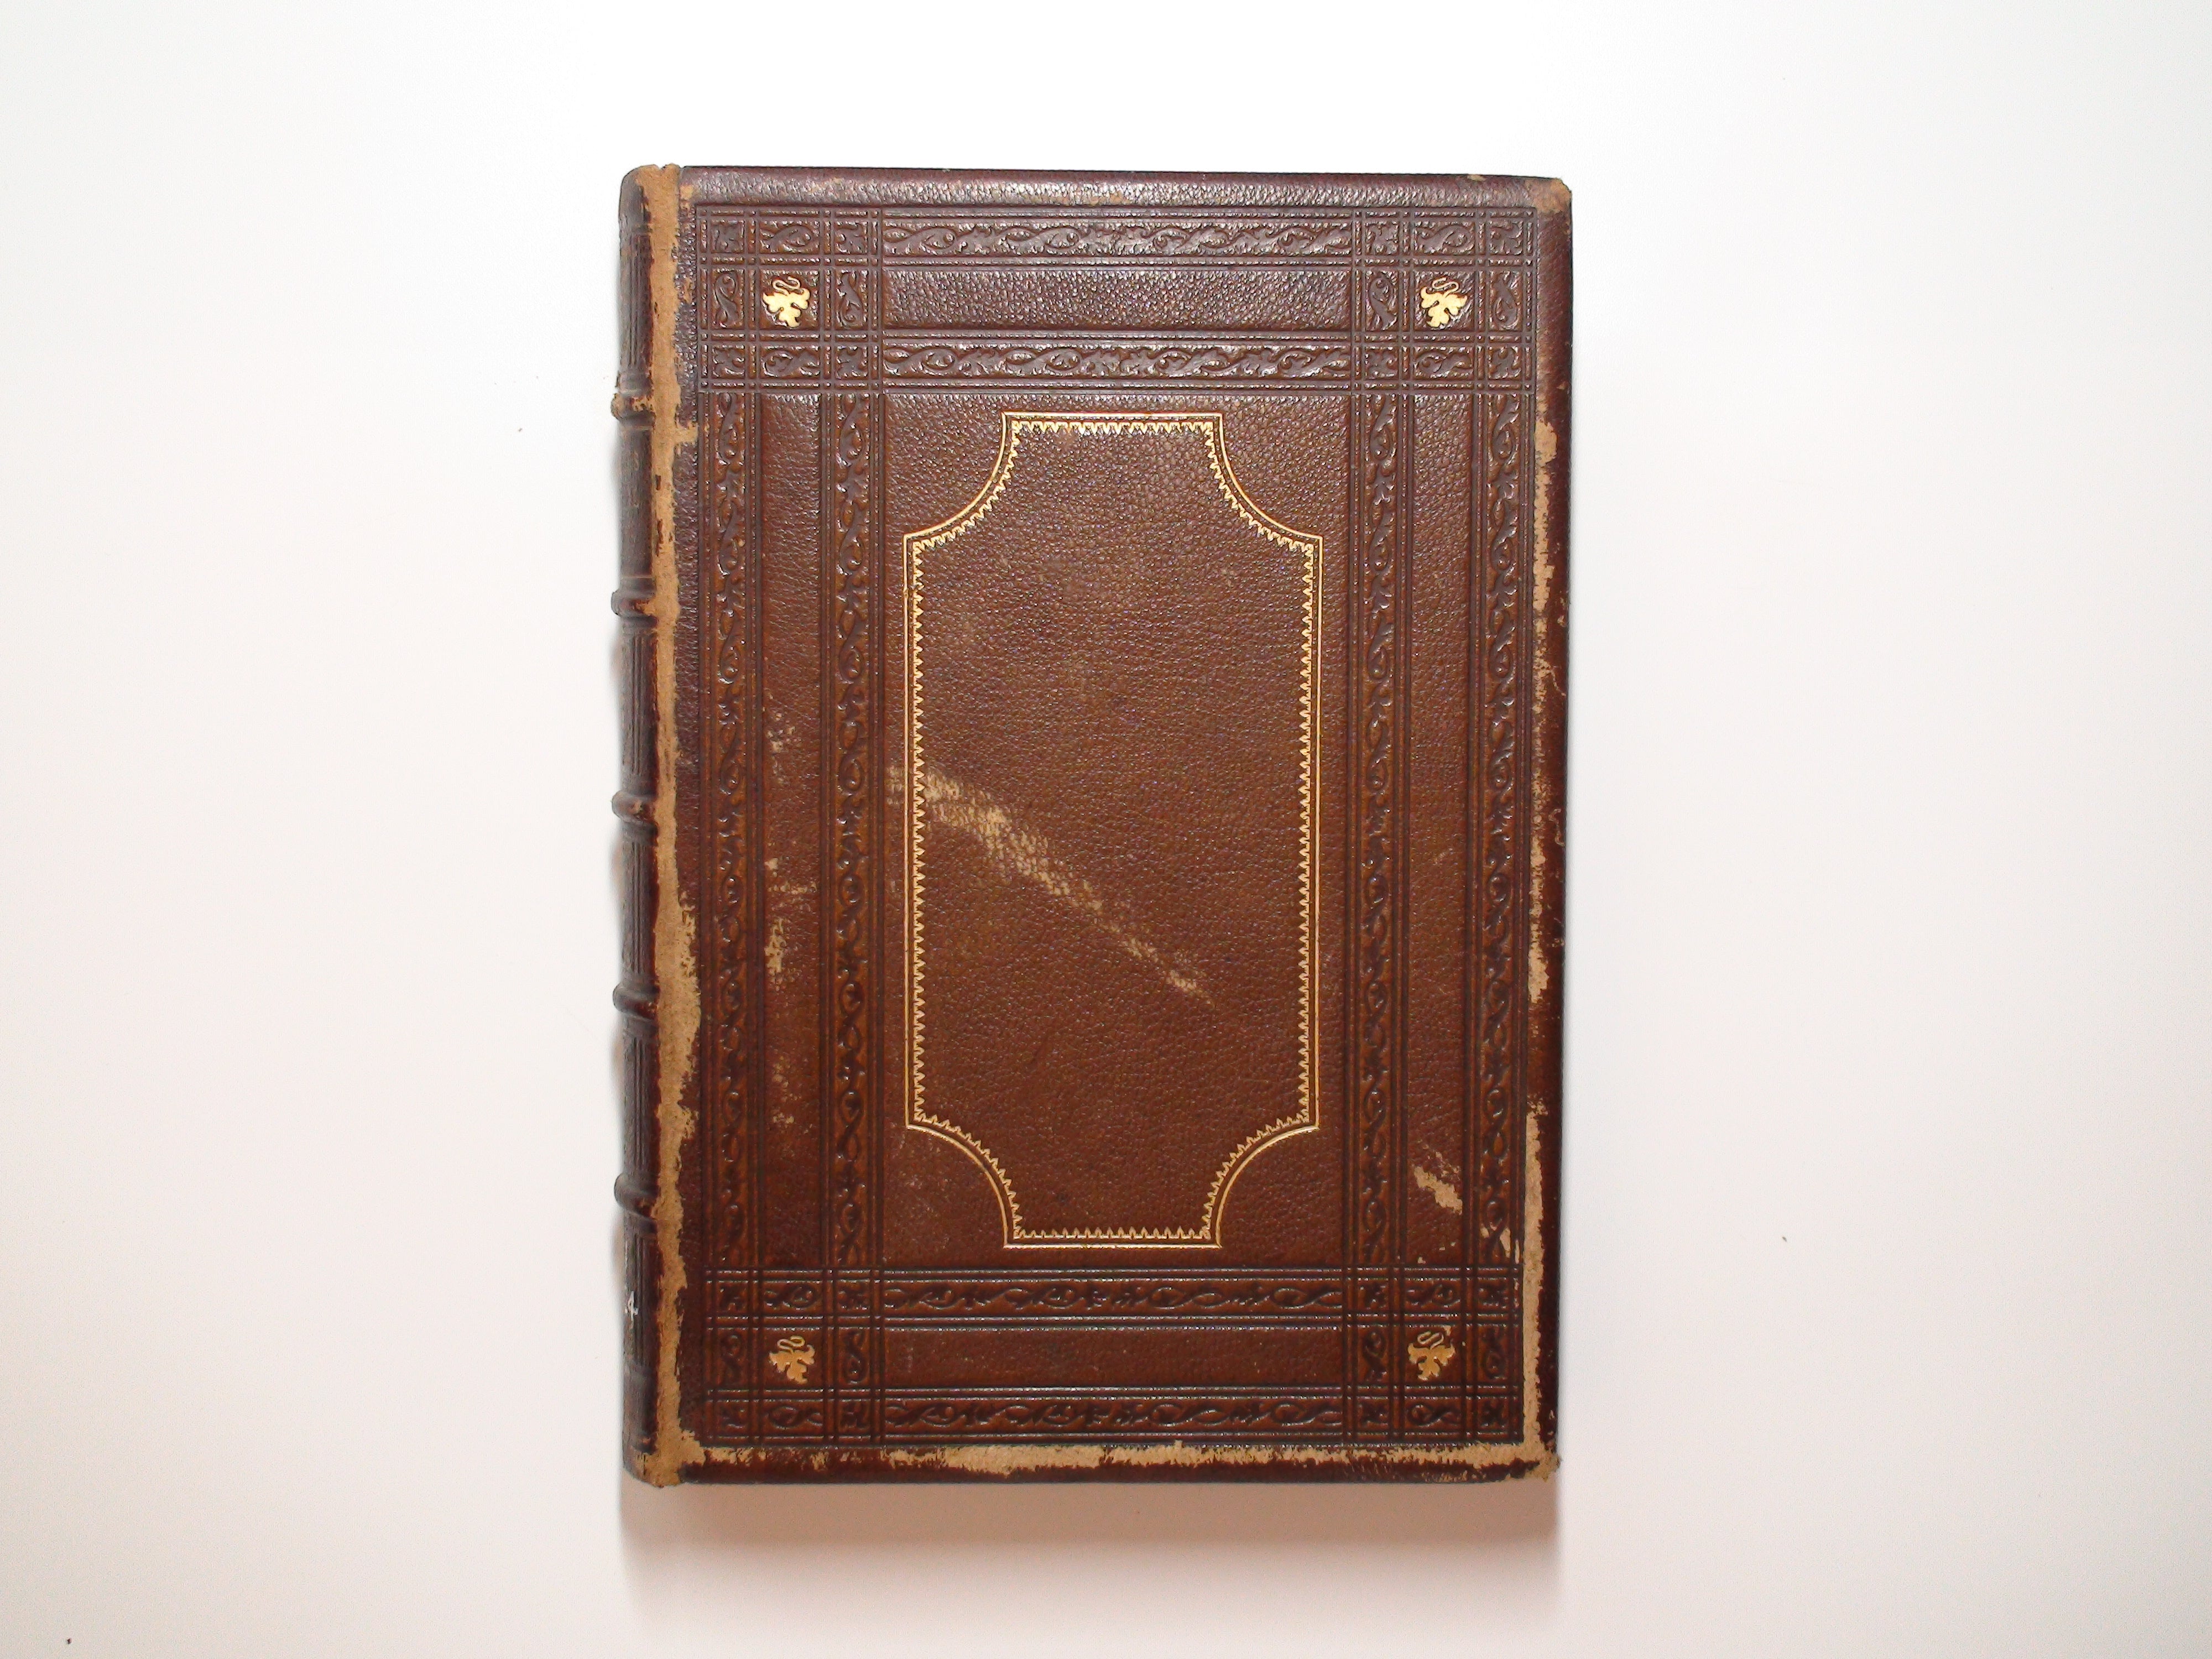 Poetical Works of Oliver Goldsmith, Leather, E. H. Butler, Illustrated, 1864